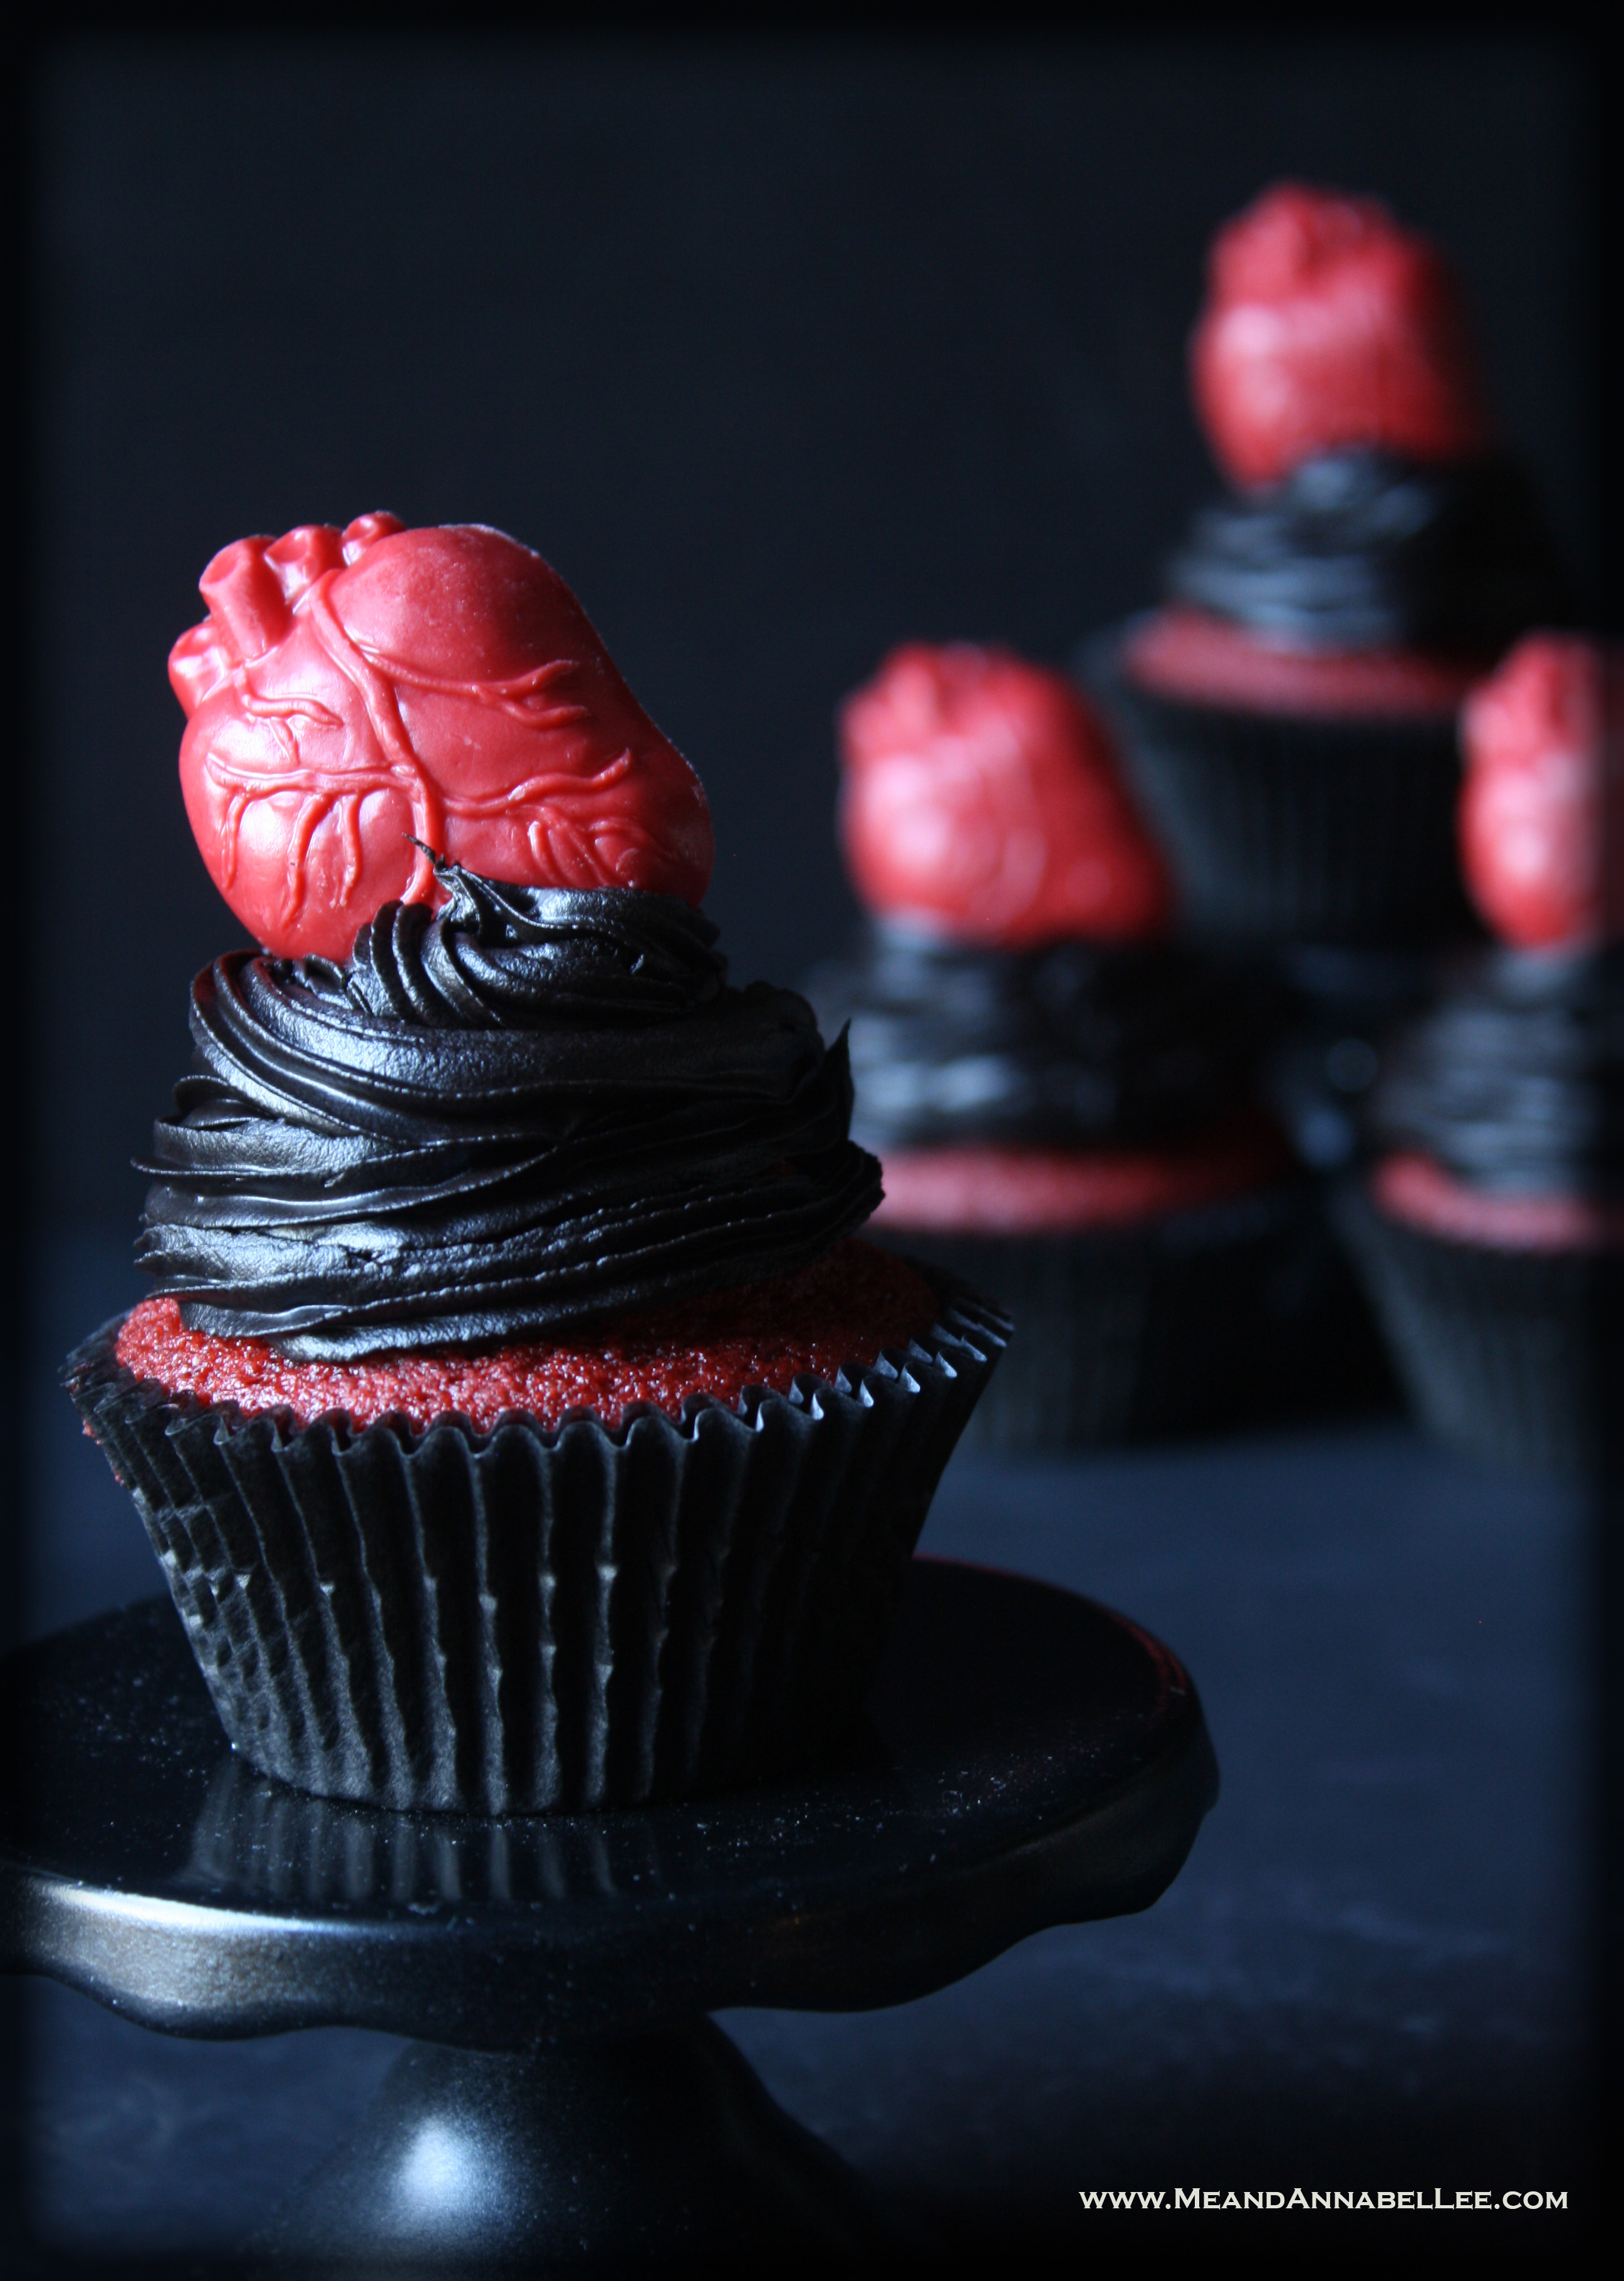 Anti Valentine Anatomical Heart Cupcakes | Red Velvet Cake and Black Fudge Frosting | Halloween Treats | www.MeandAnnabelLee.com